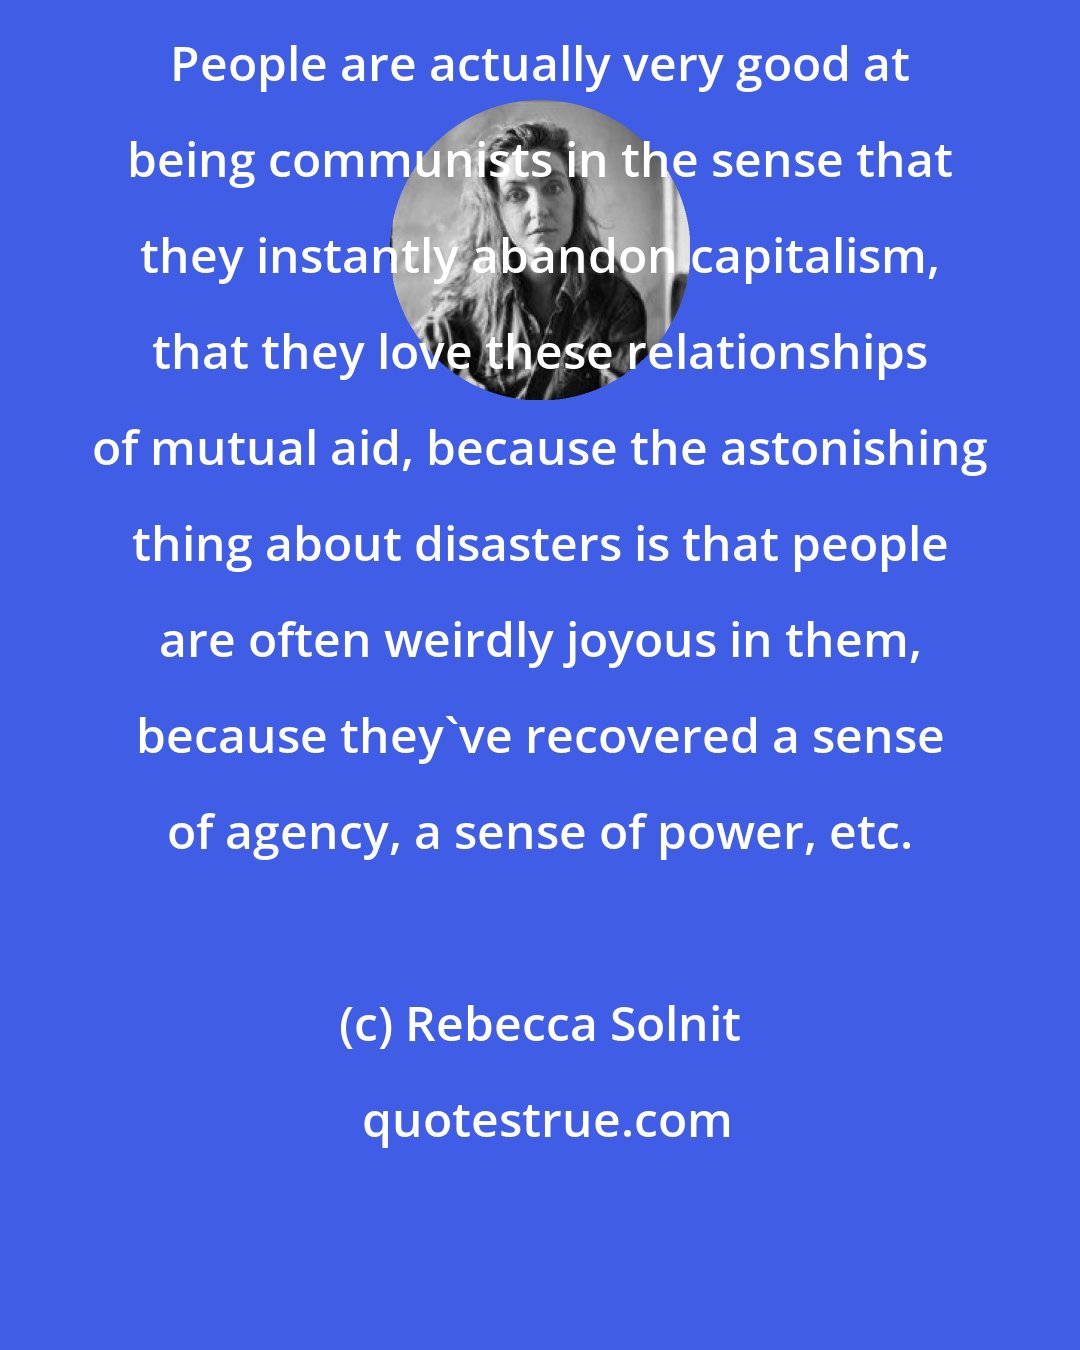 Rebecca Solnit: People are actually very good at being communists in the sense that they instantly abandon capitalism, that they love these relationships of mutual aid, because the astonishing thing about disasters is that people are often weirdly joyous in them, because they've recovered a sense of agency, a sense of power, etc.